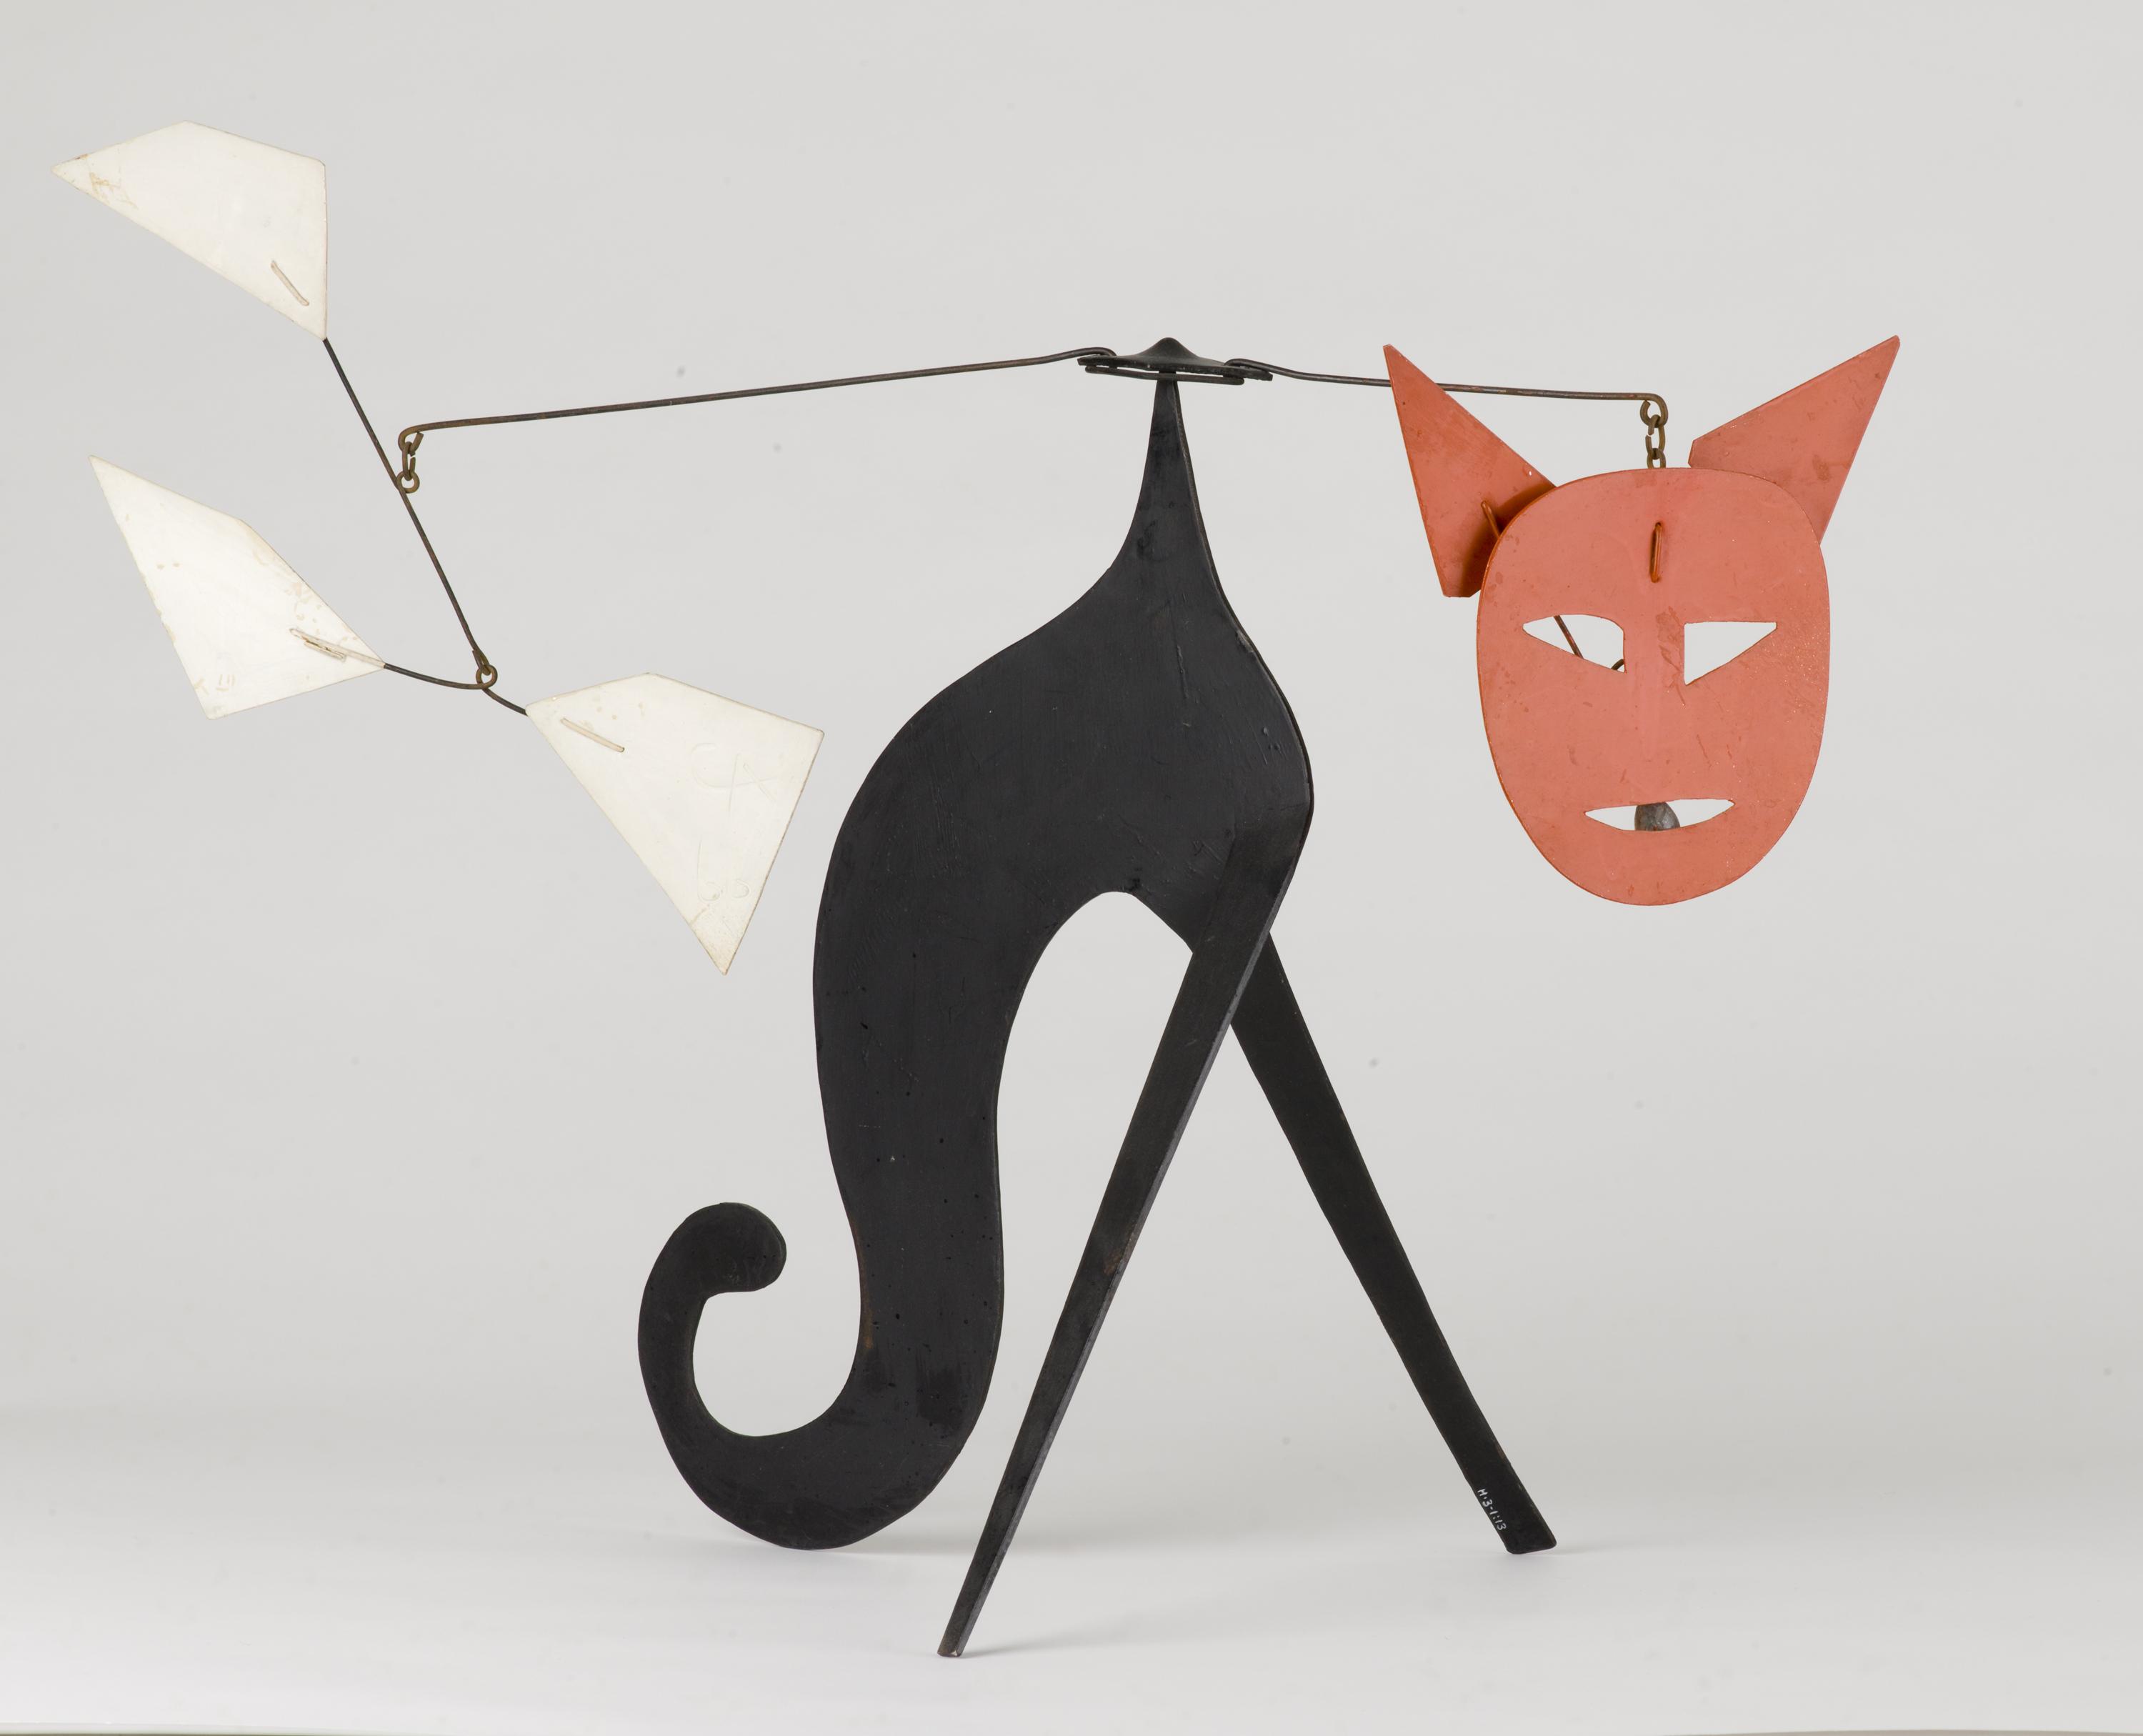 A mobile sculpture resembles a cat with a red face.